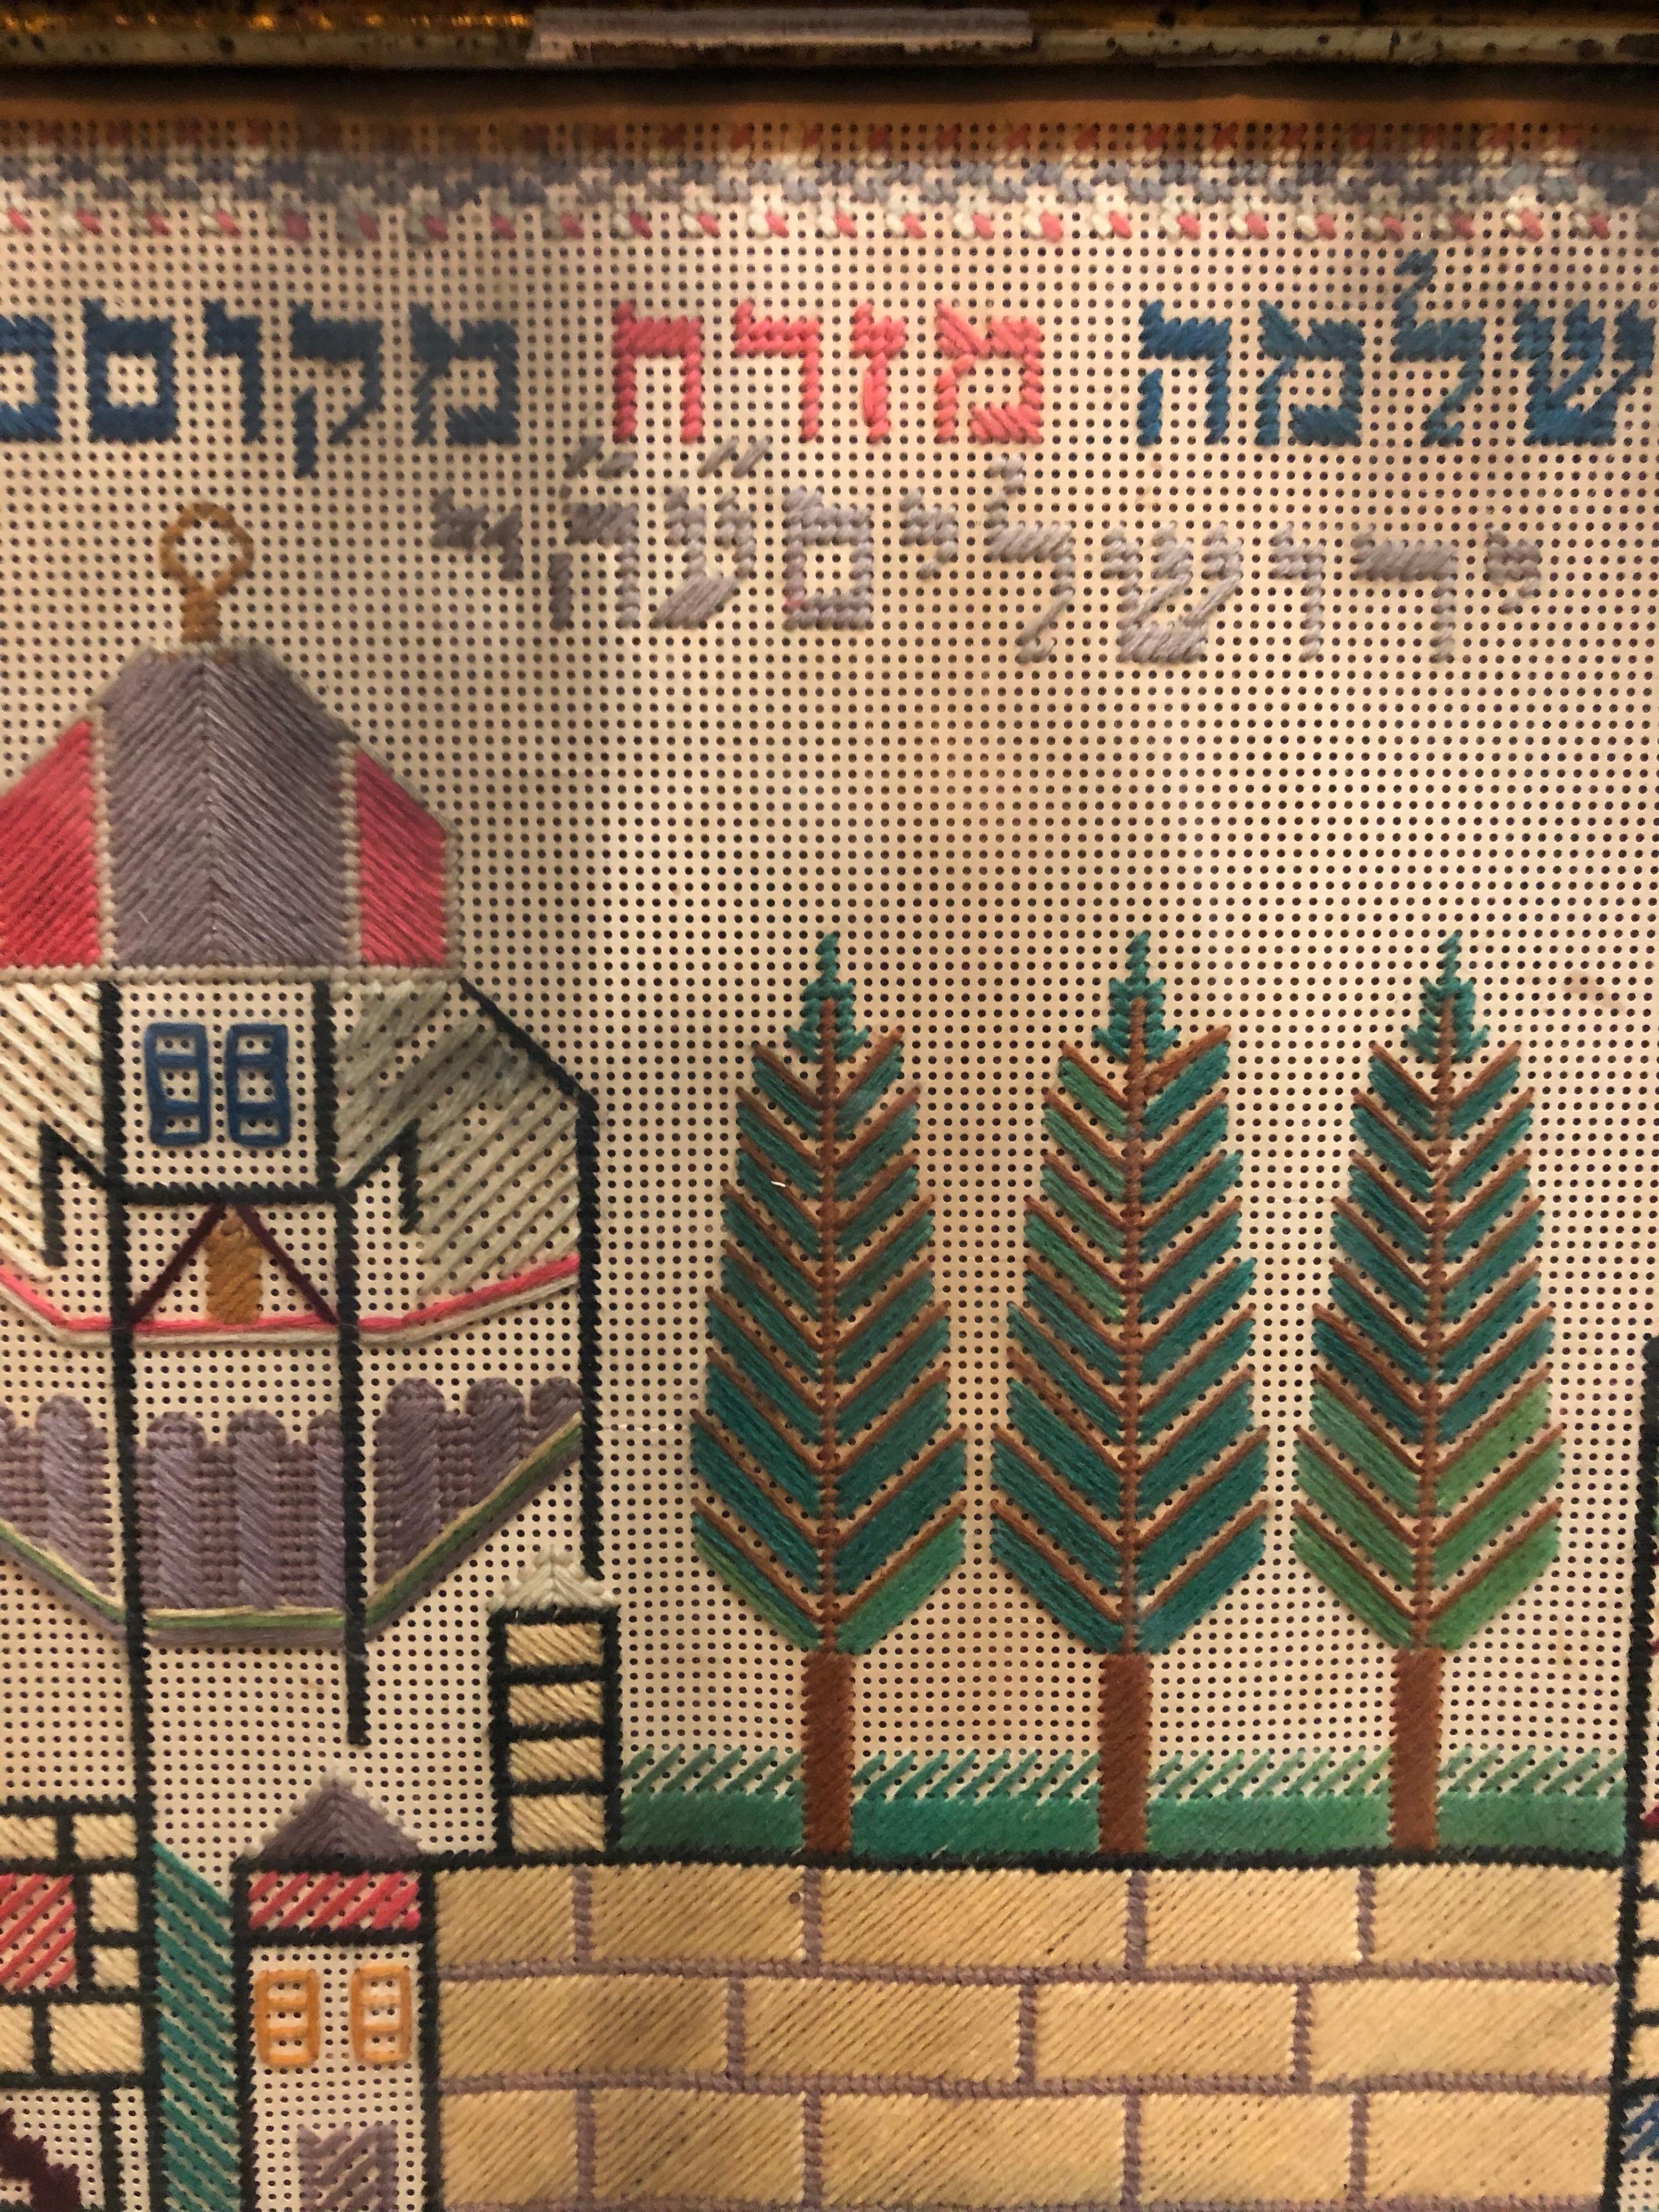 Punch point embroidered Sampler, Midrash Shlomo Jerusalem, 1900/1901. (It is dated with the Jewish Year 5661)

This sort of art, craft work, emerges from a long tradition of Jewish folk art.
Today, many of these artists are professionally trained